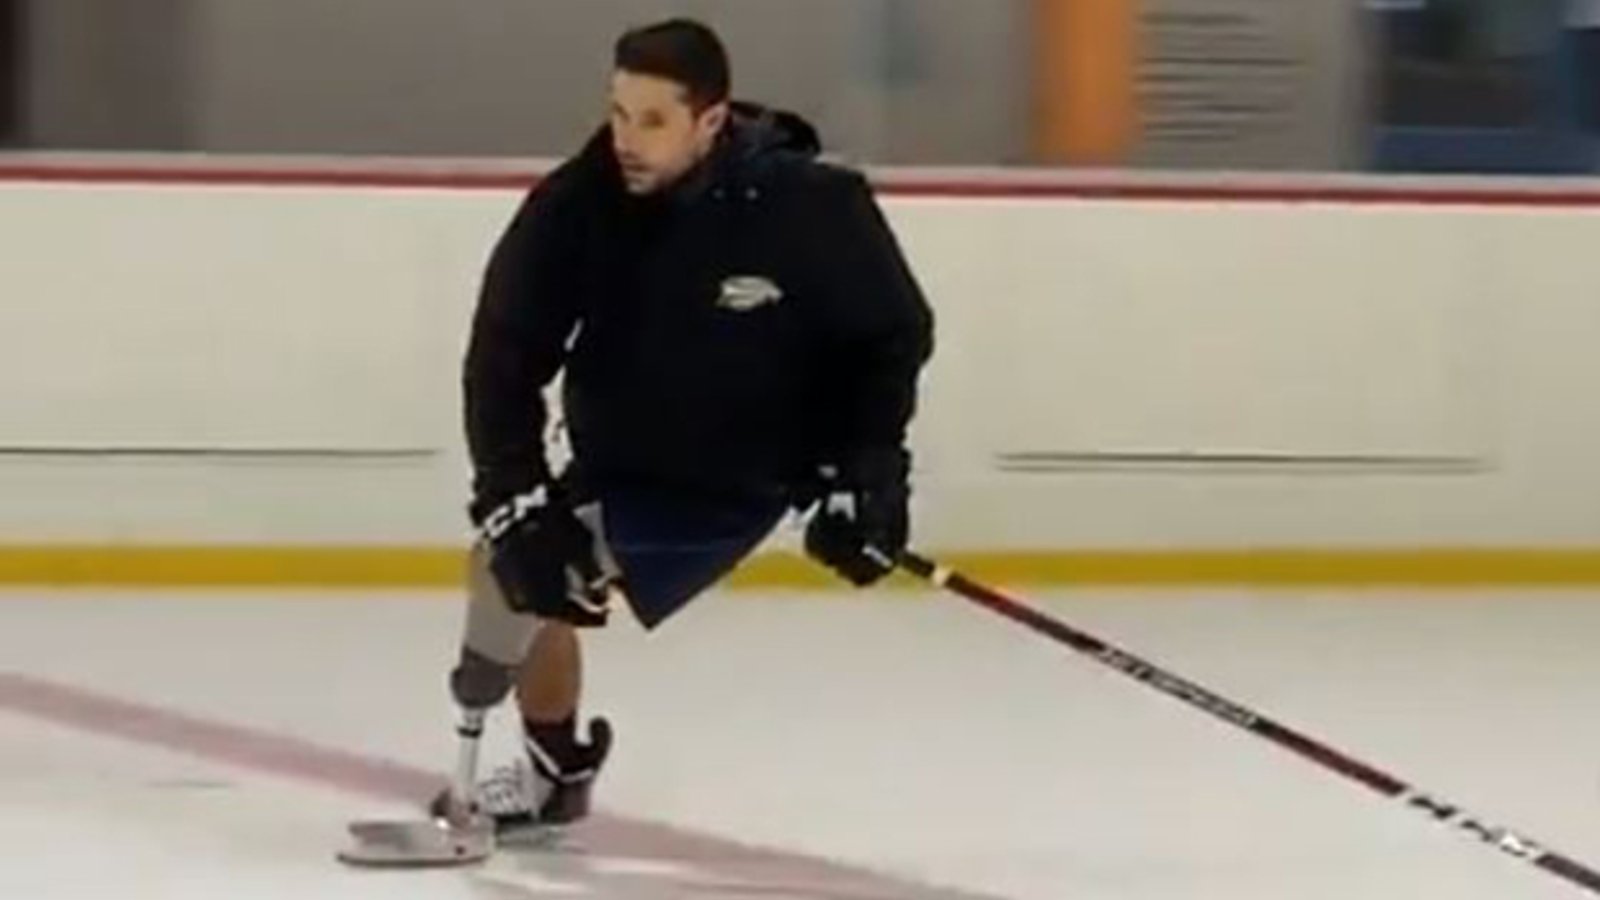 Cunningham shocked by reaction from viral video of him skating with prosthetic leg